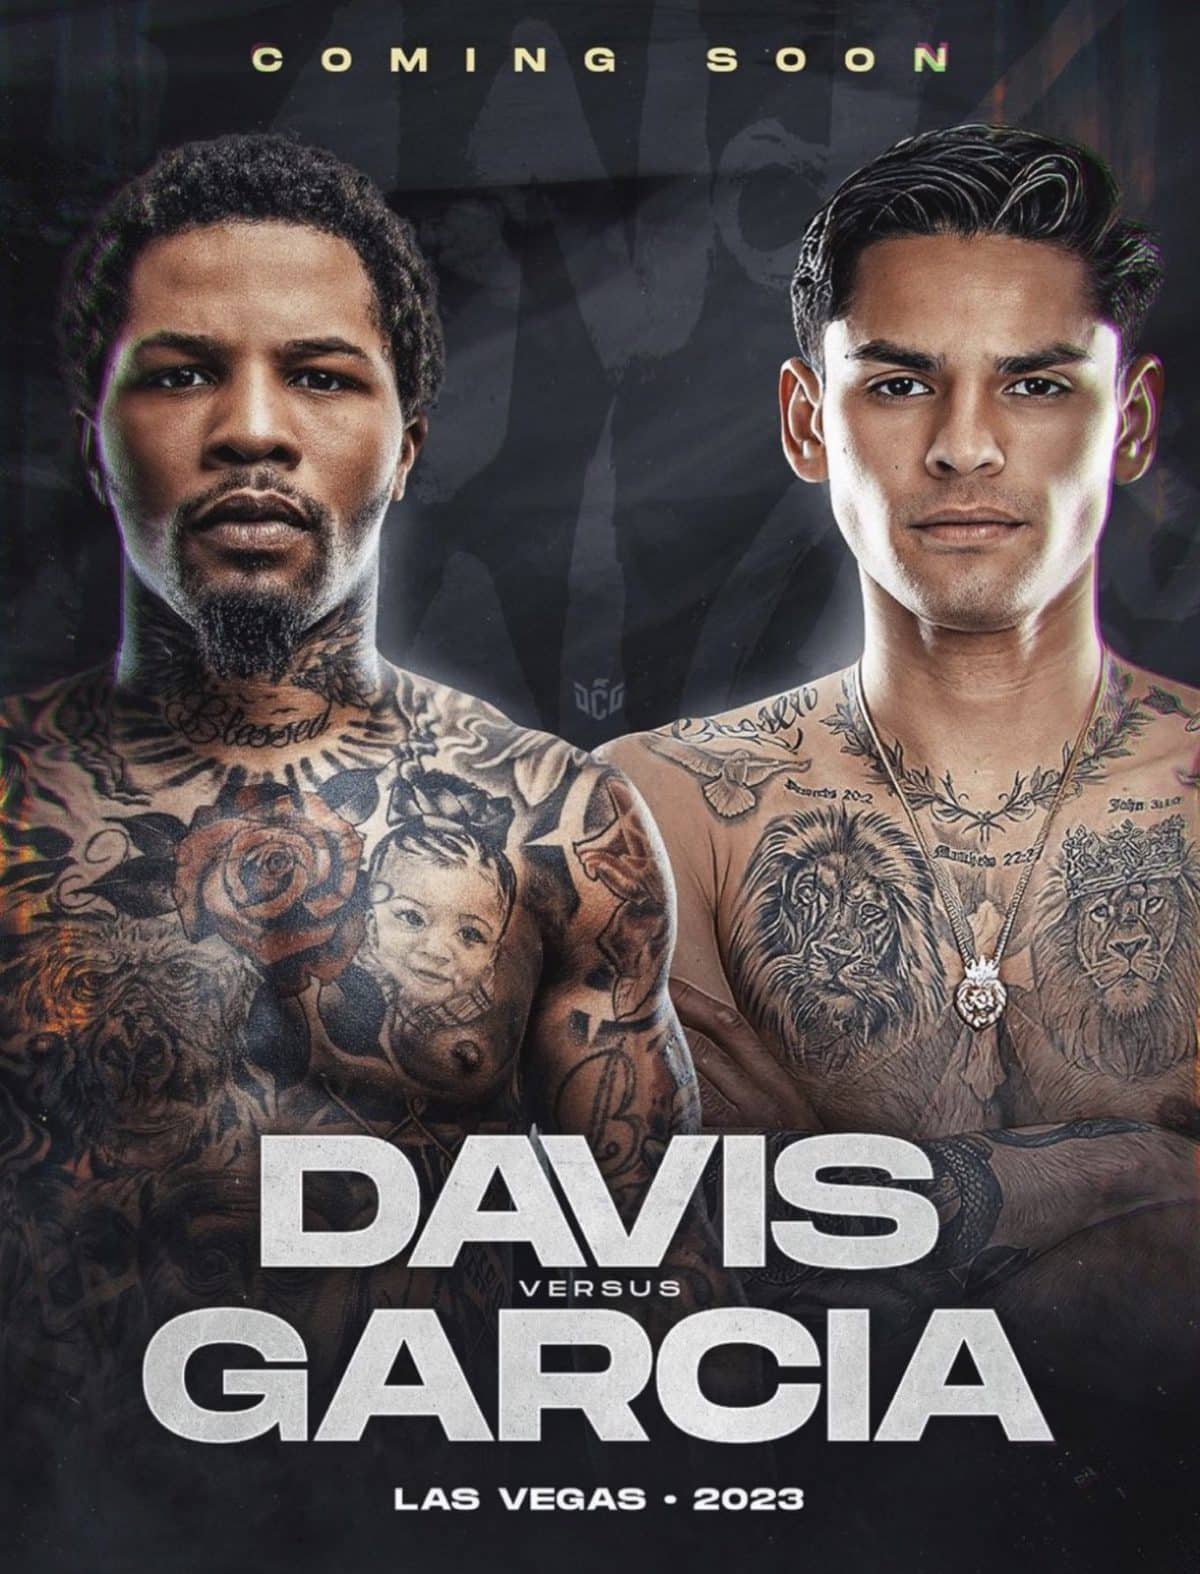 Image: Ryan Garcia willing to do VADA testing, is Gervonta avoid fight?